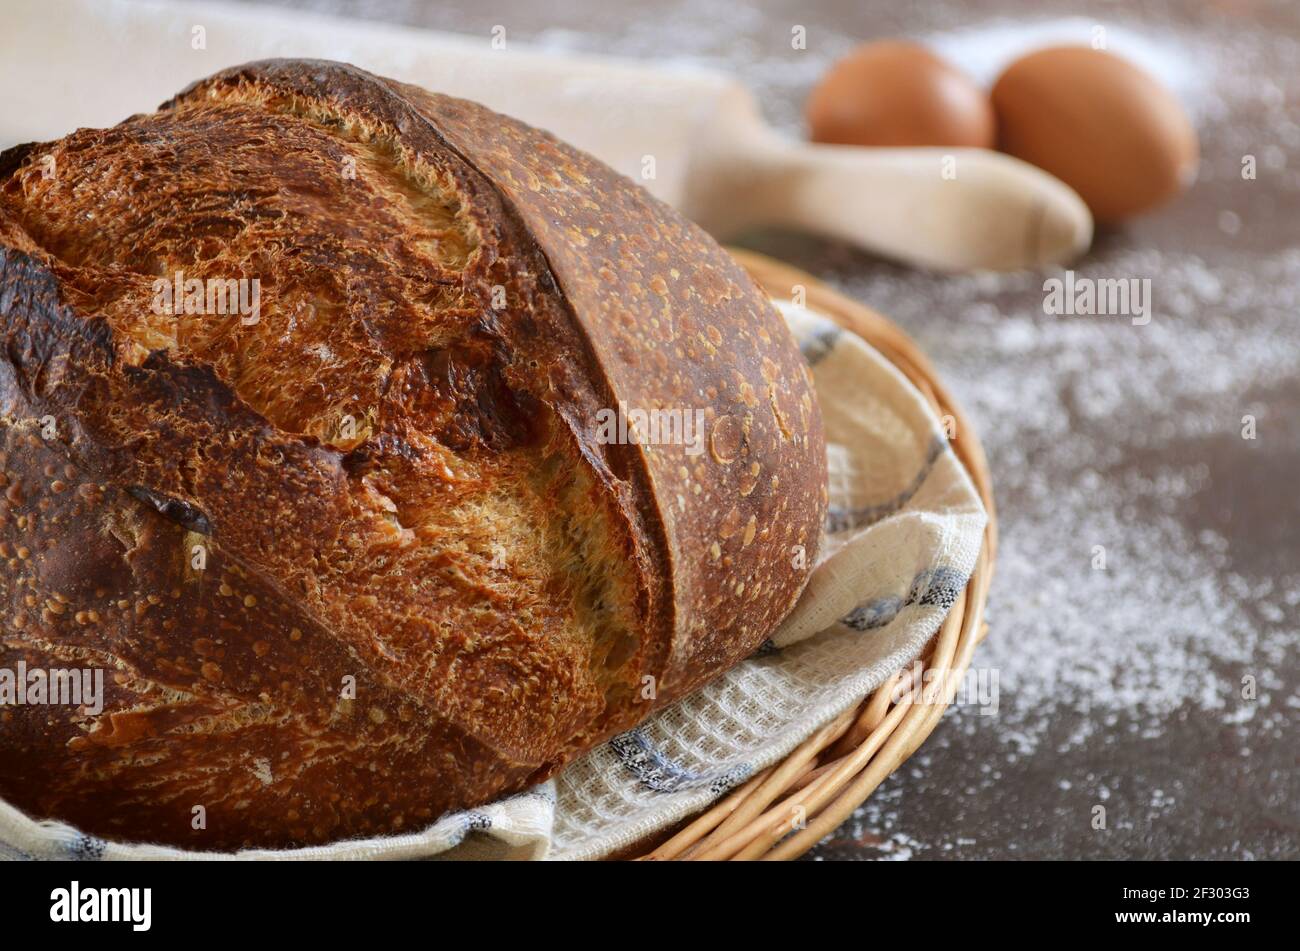 Freshly baked homemade sourdough bread with a crisp crust close-up, selective focus. Stock Photo